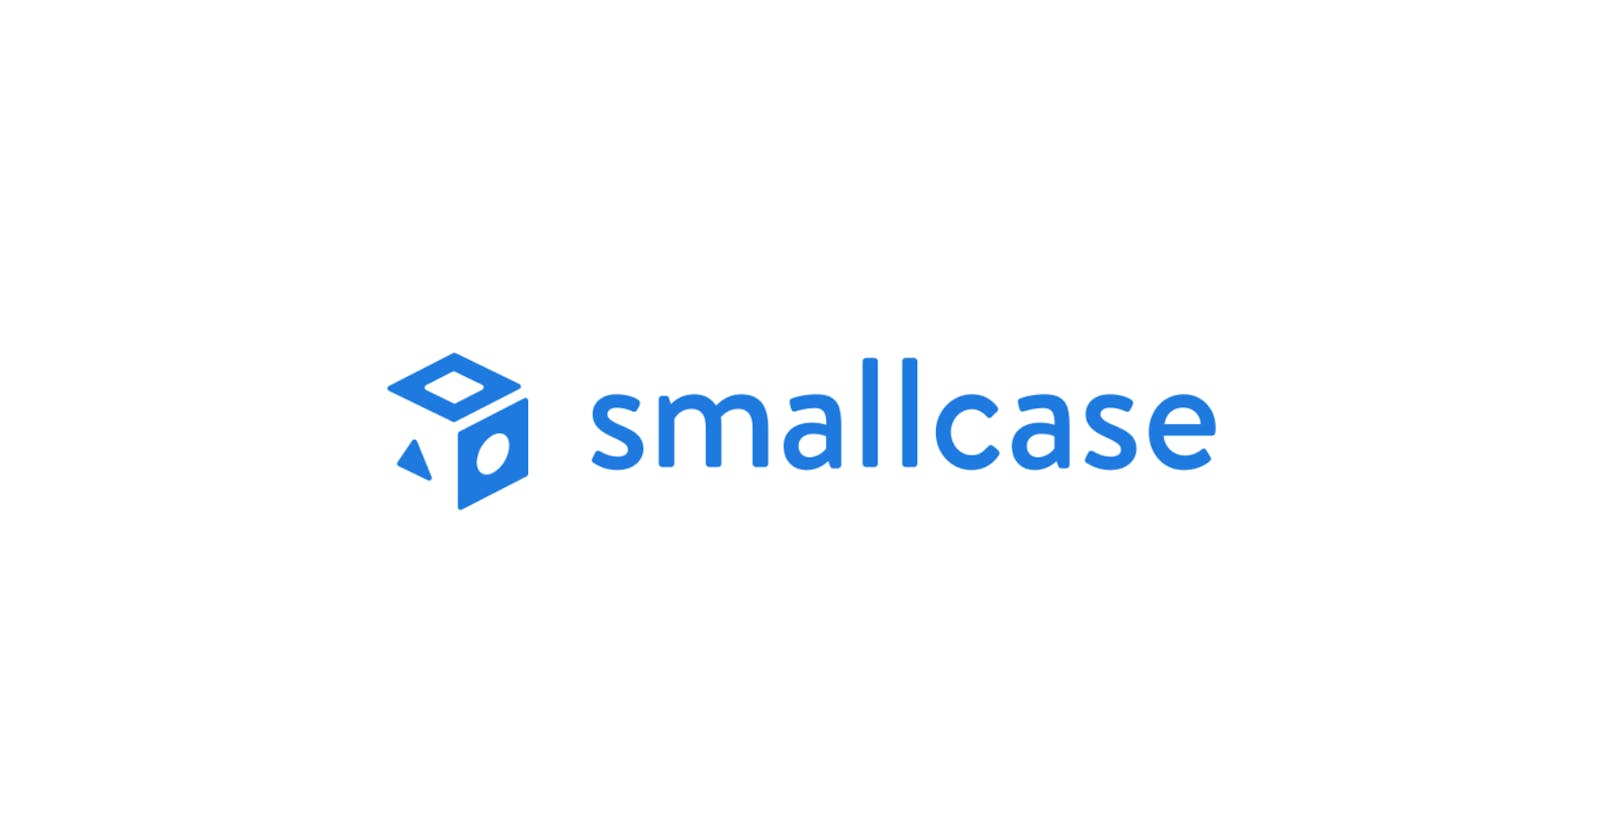 Clone of Smallcase.com, Construct week Experience